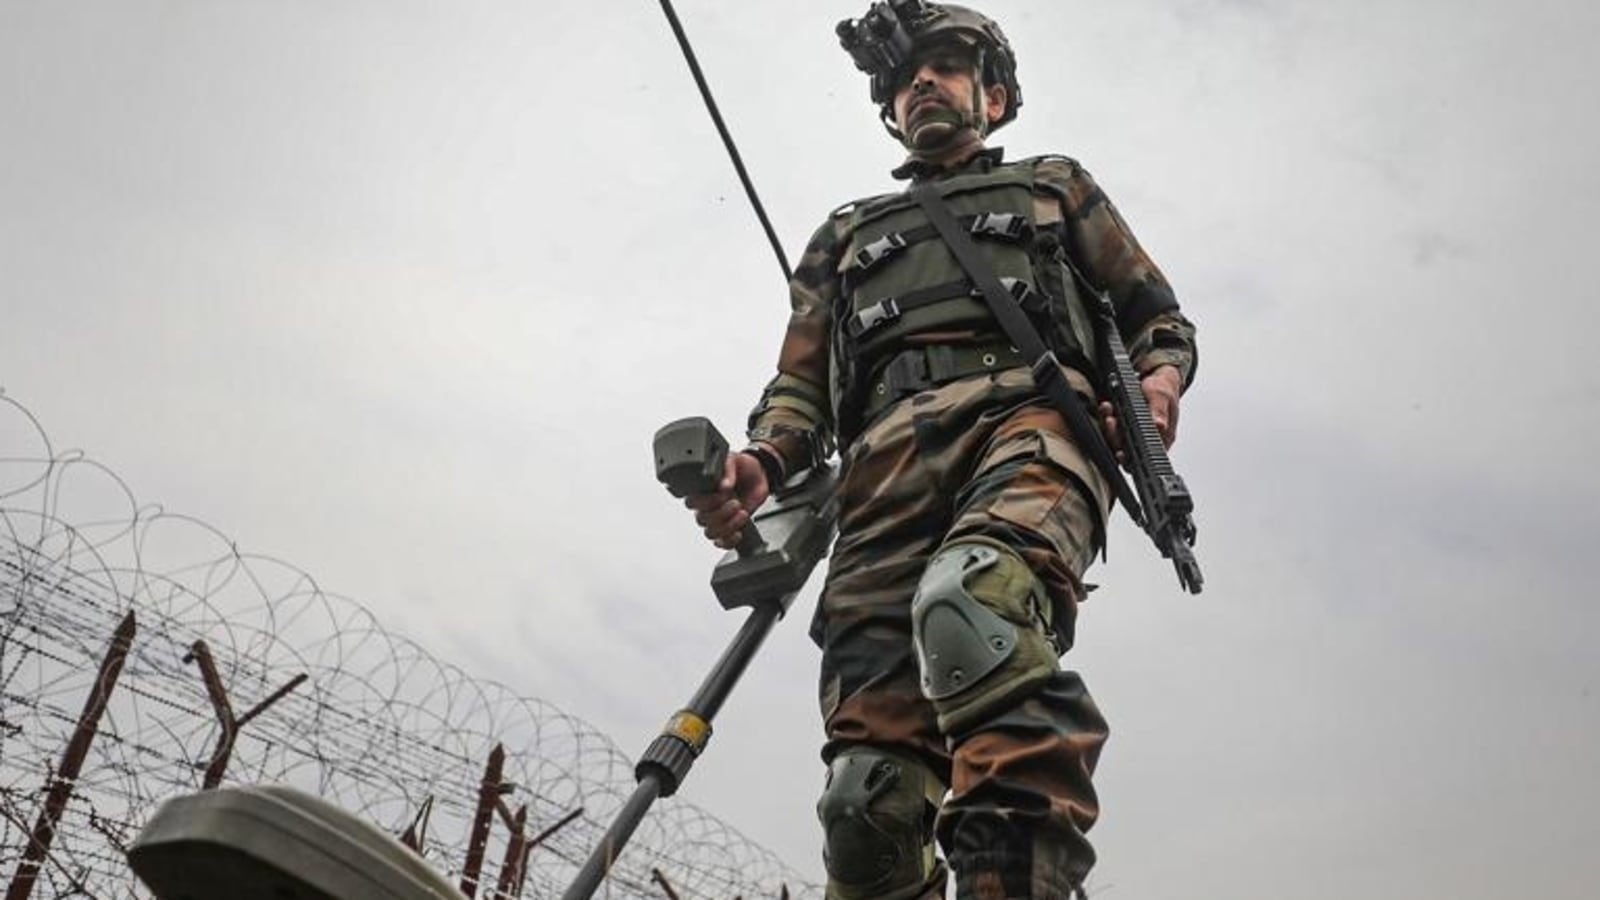 Indian Army Uniform: Indian Army implements common uniform for